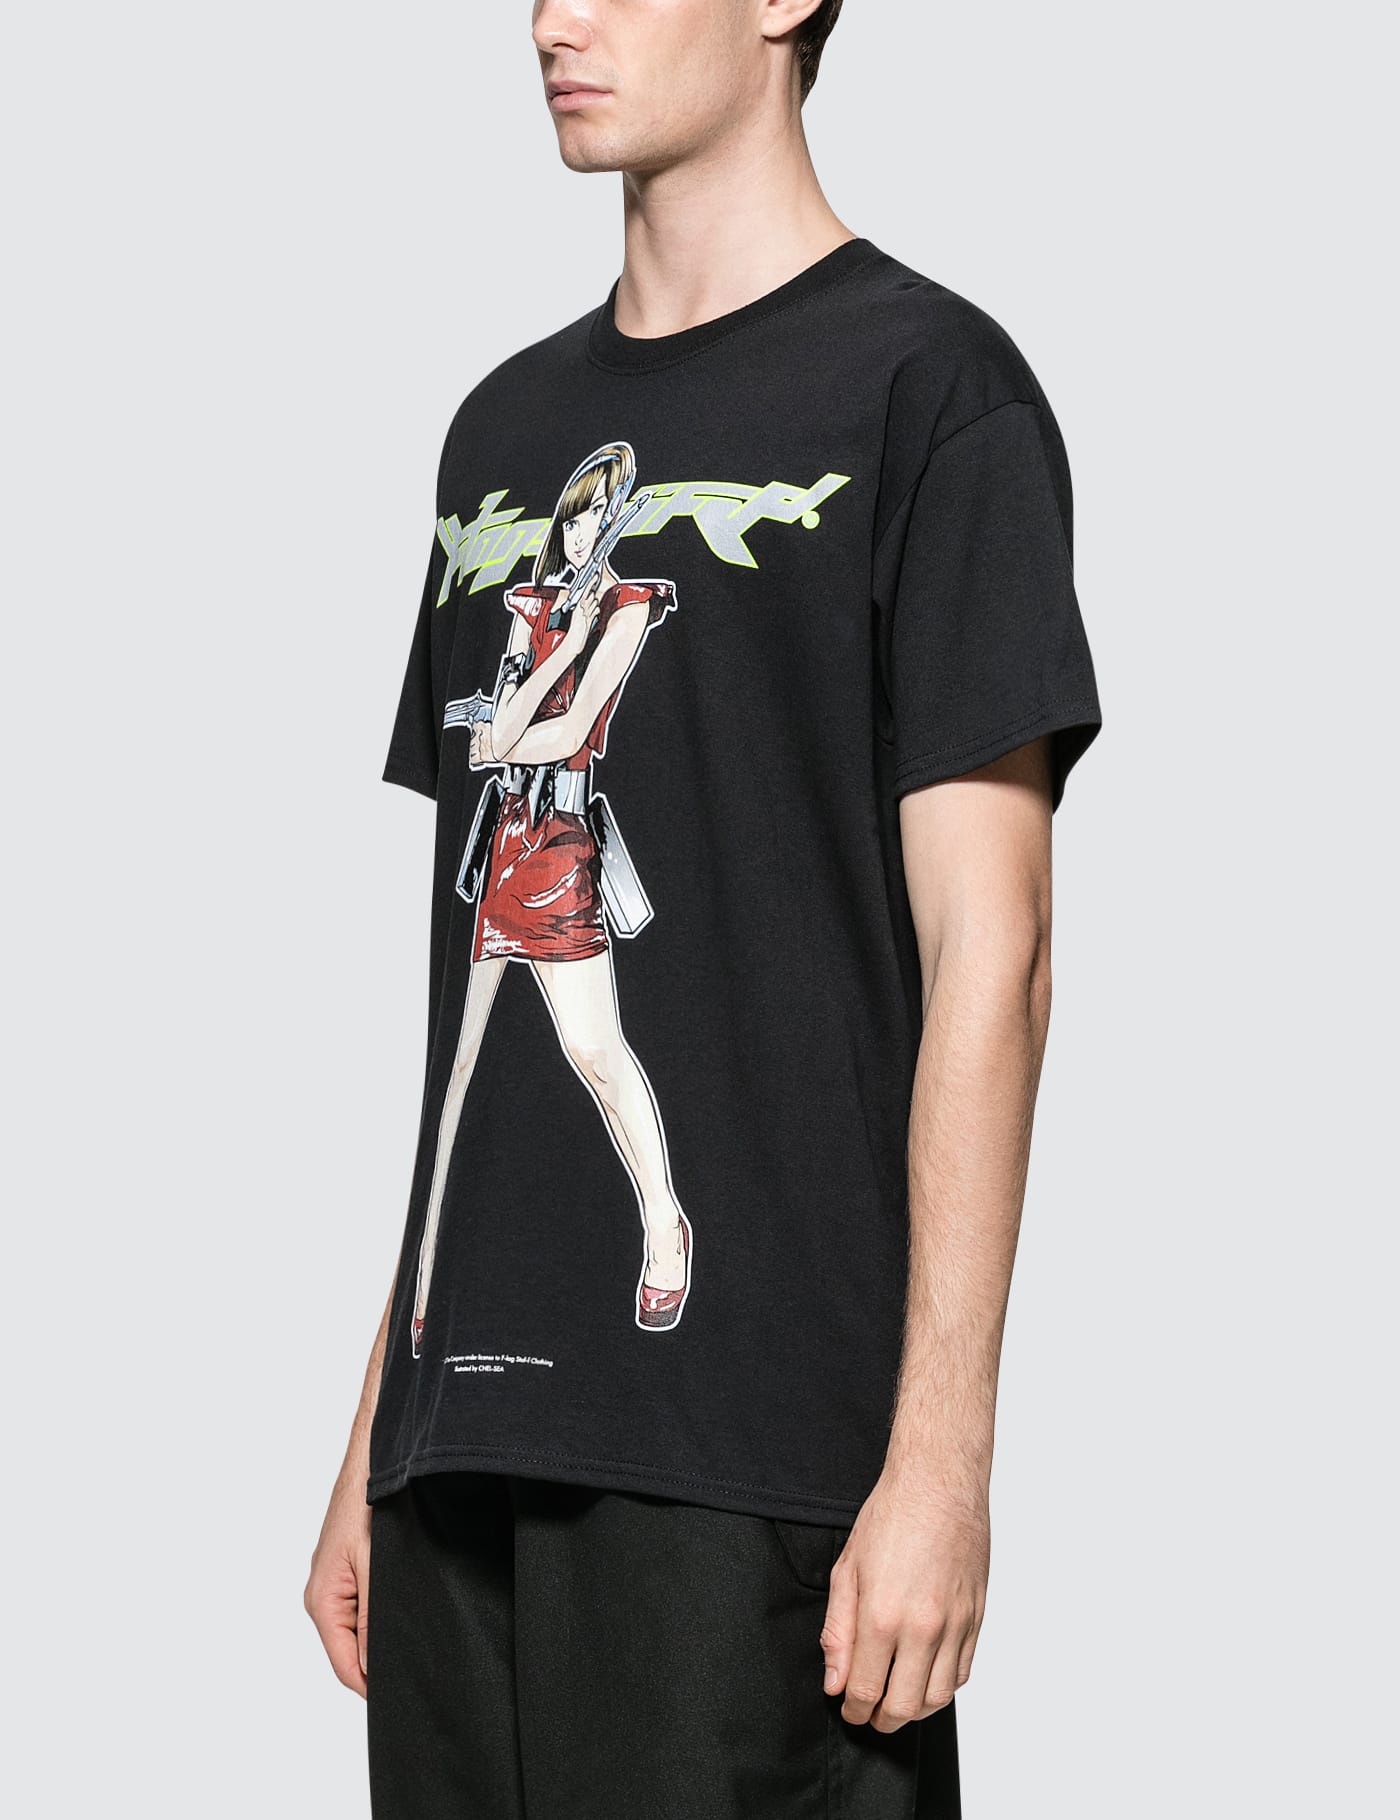 Flagstuff - Dream and Reality S/S T-Shirt | HBX - Globally Curated 